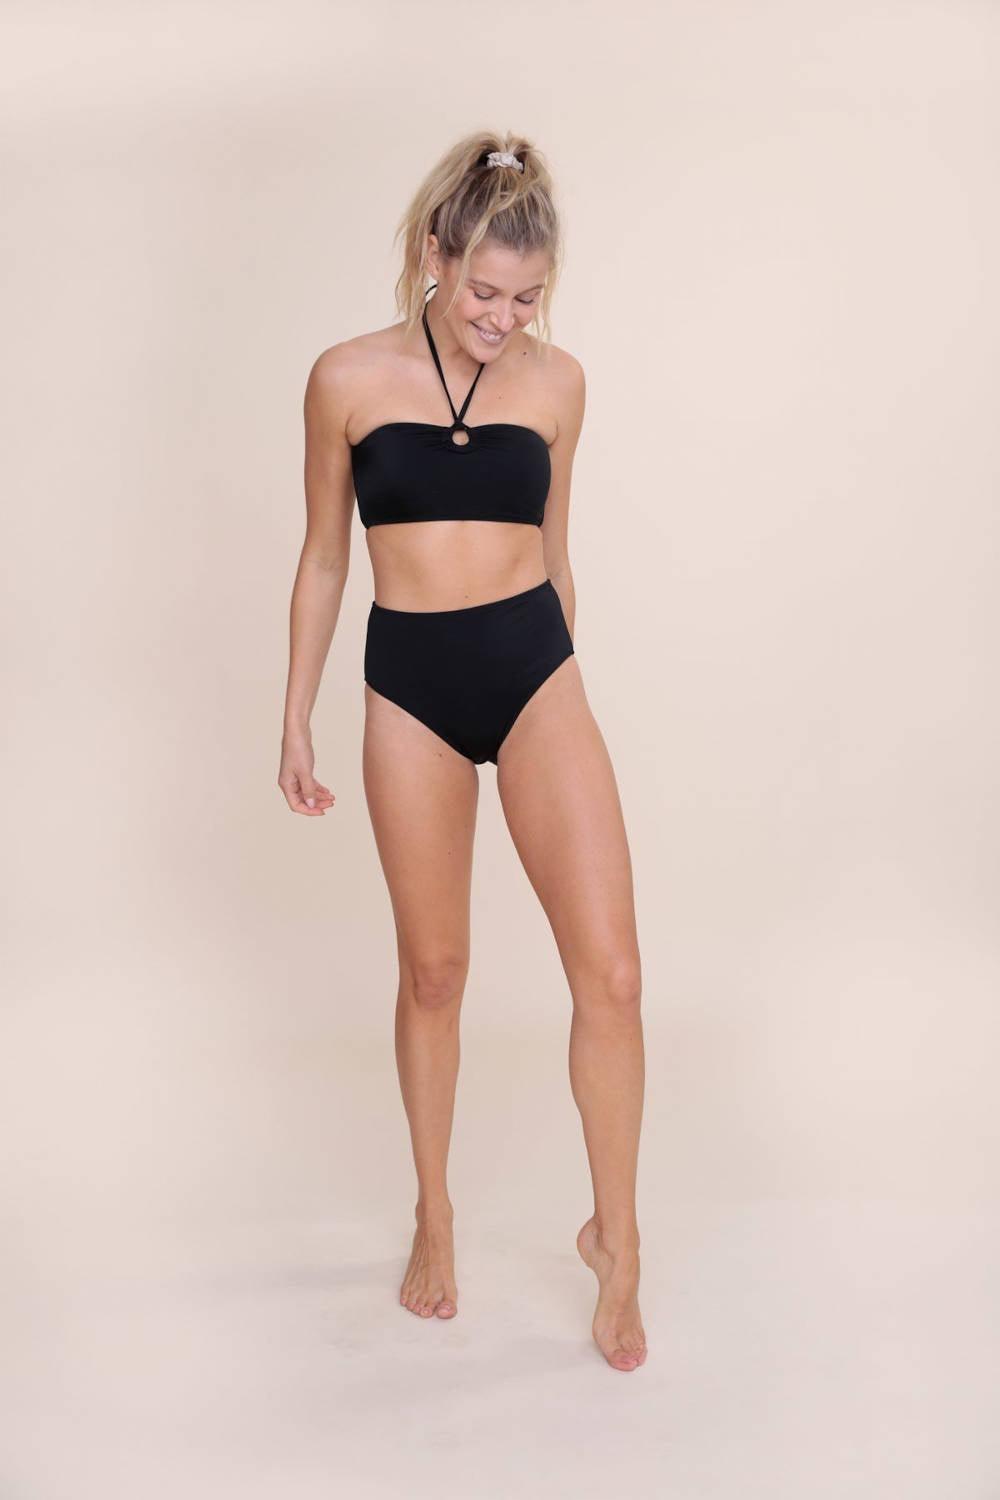 Two-piece bathing suit, American